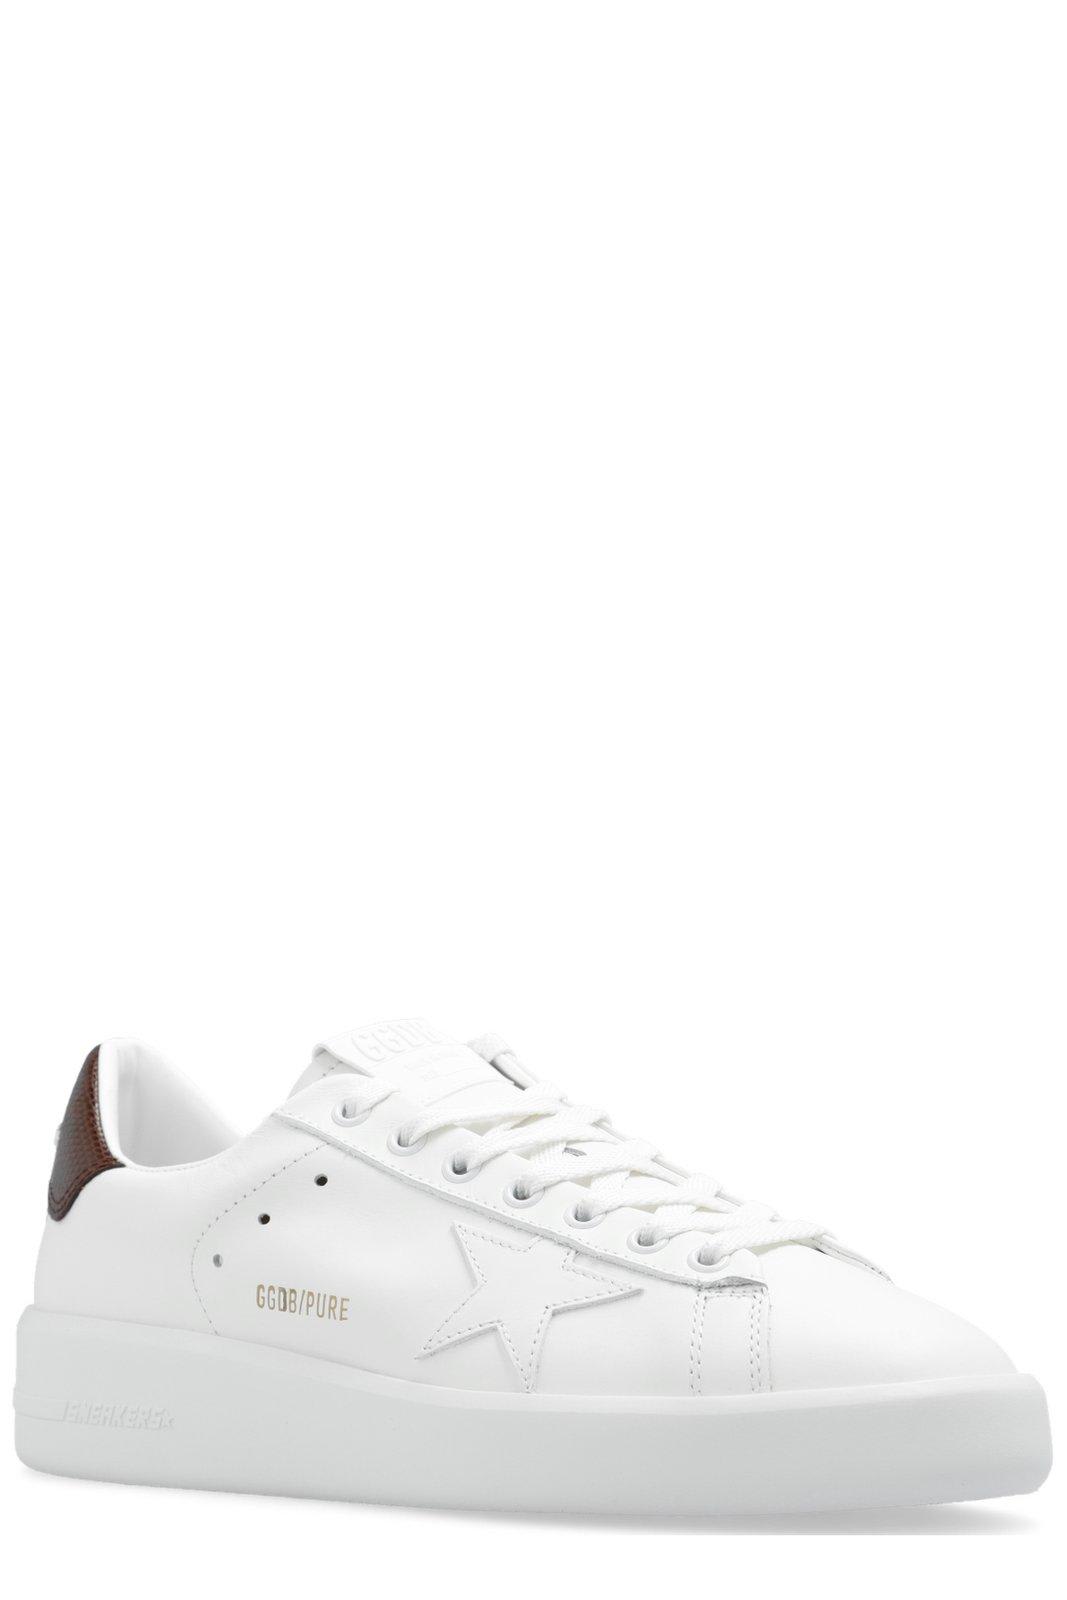 Shop Golden Goose Pure-star Lace-up Sneakers In White/burgundy